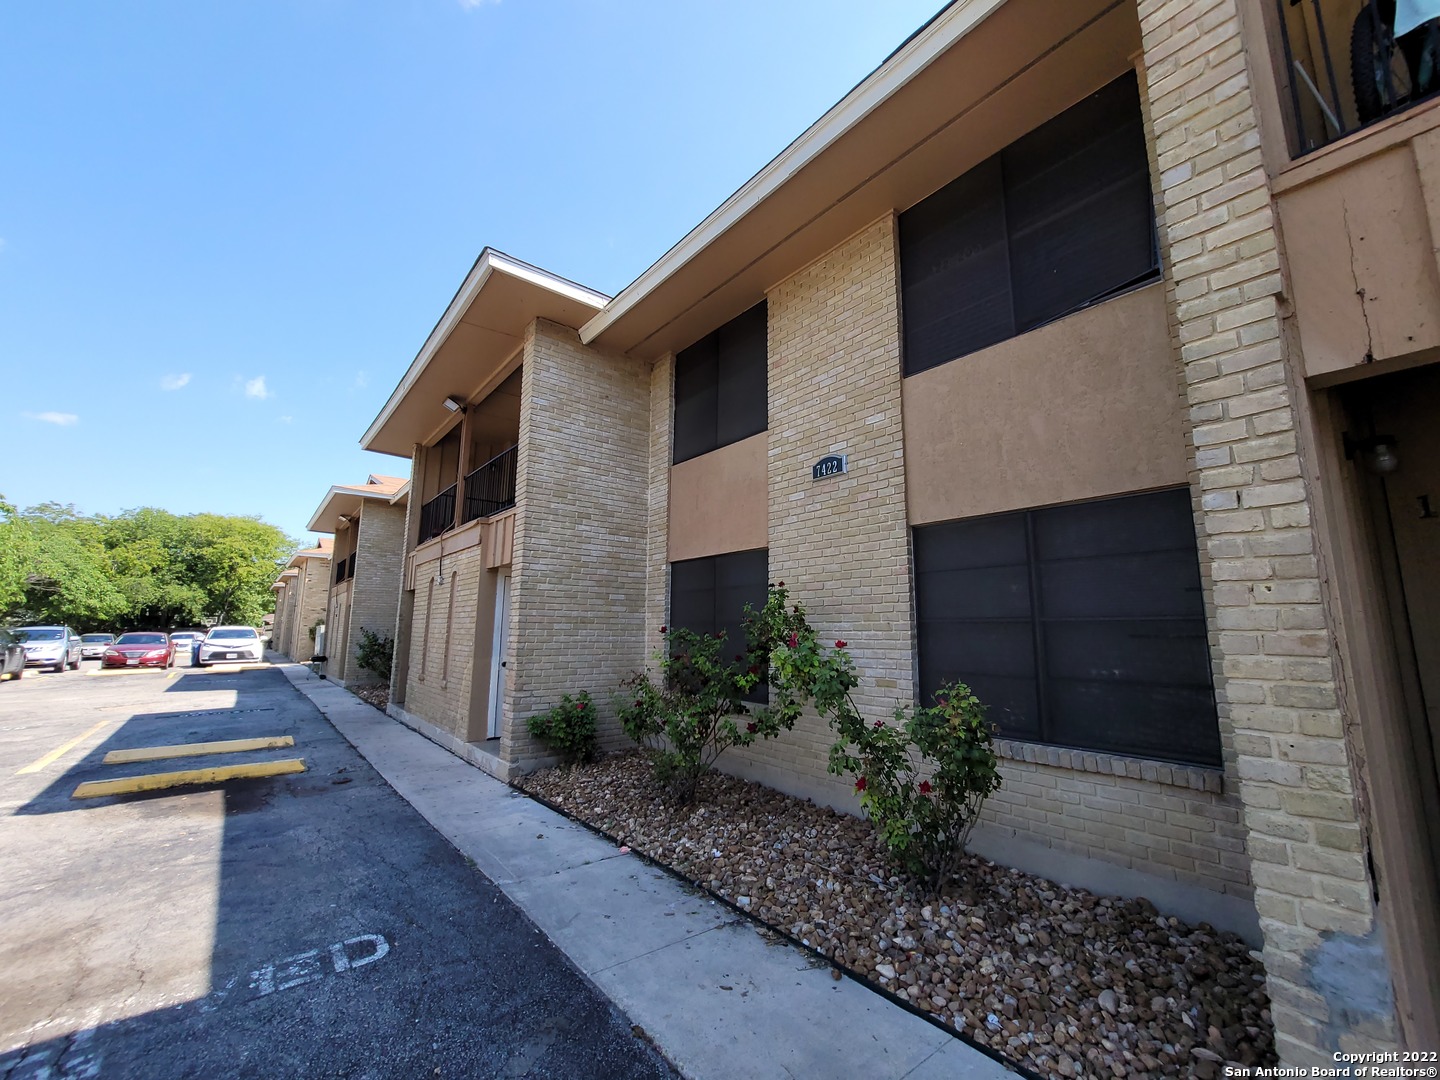 Excellent opportunity to continue the repositioning of this 28 unit apartment complex located just south of SW Military in San Antonio. This property includes fourteen 1 bedroom apartment and fourteen 2 bedroom apartments with 2 onsite laundry facilities. Upside potential still exists with the completion of implementation of water fees and reserved parking spaces.